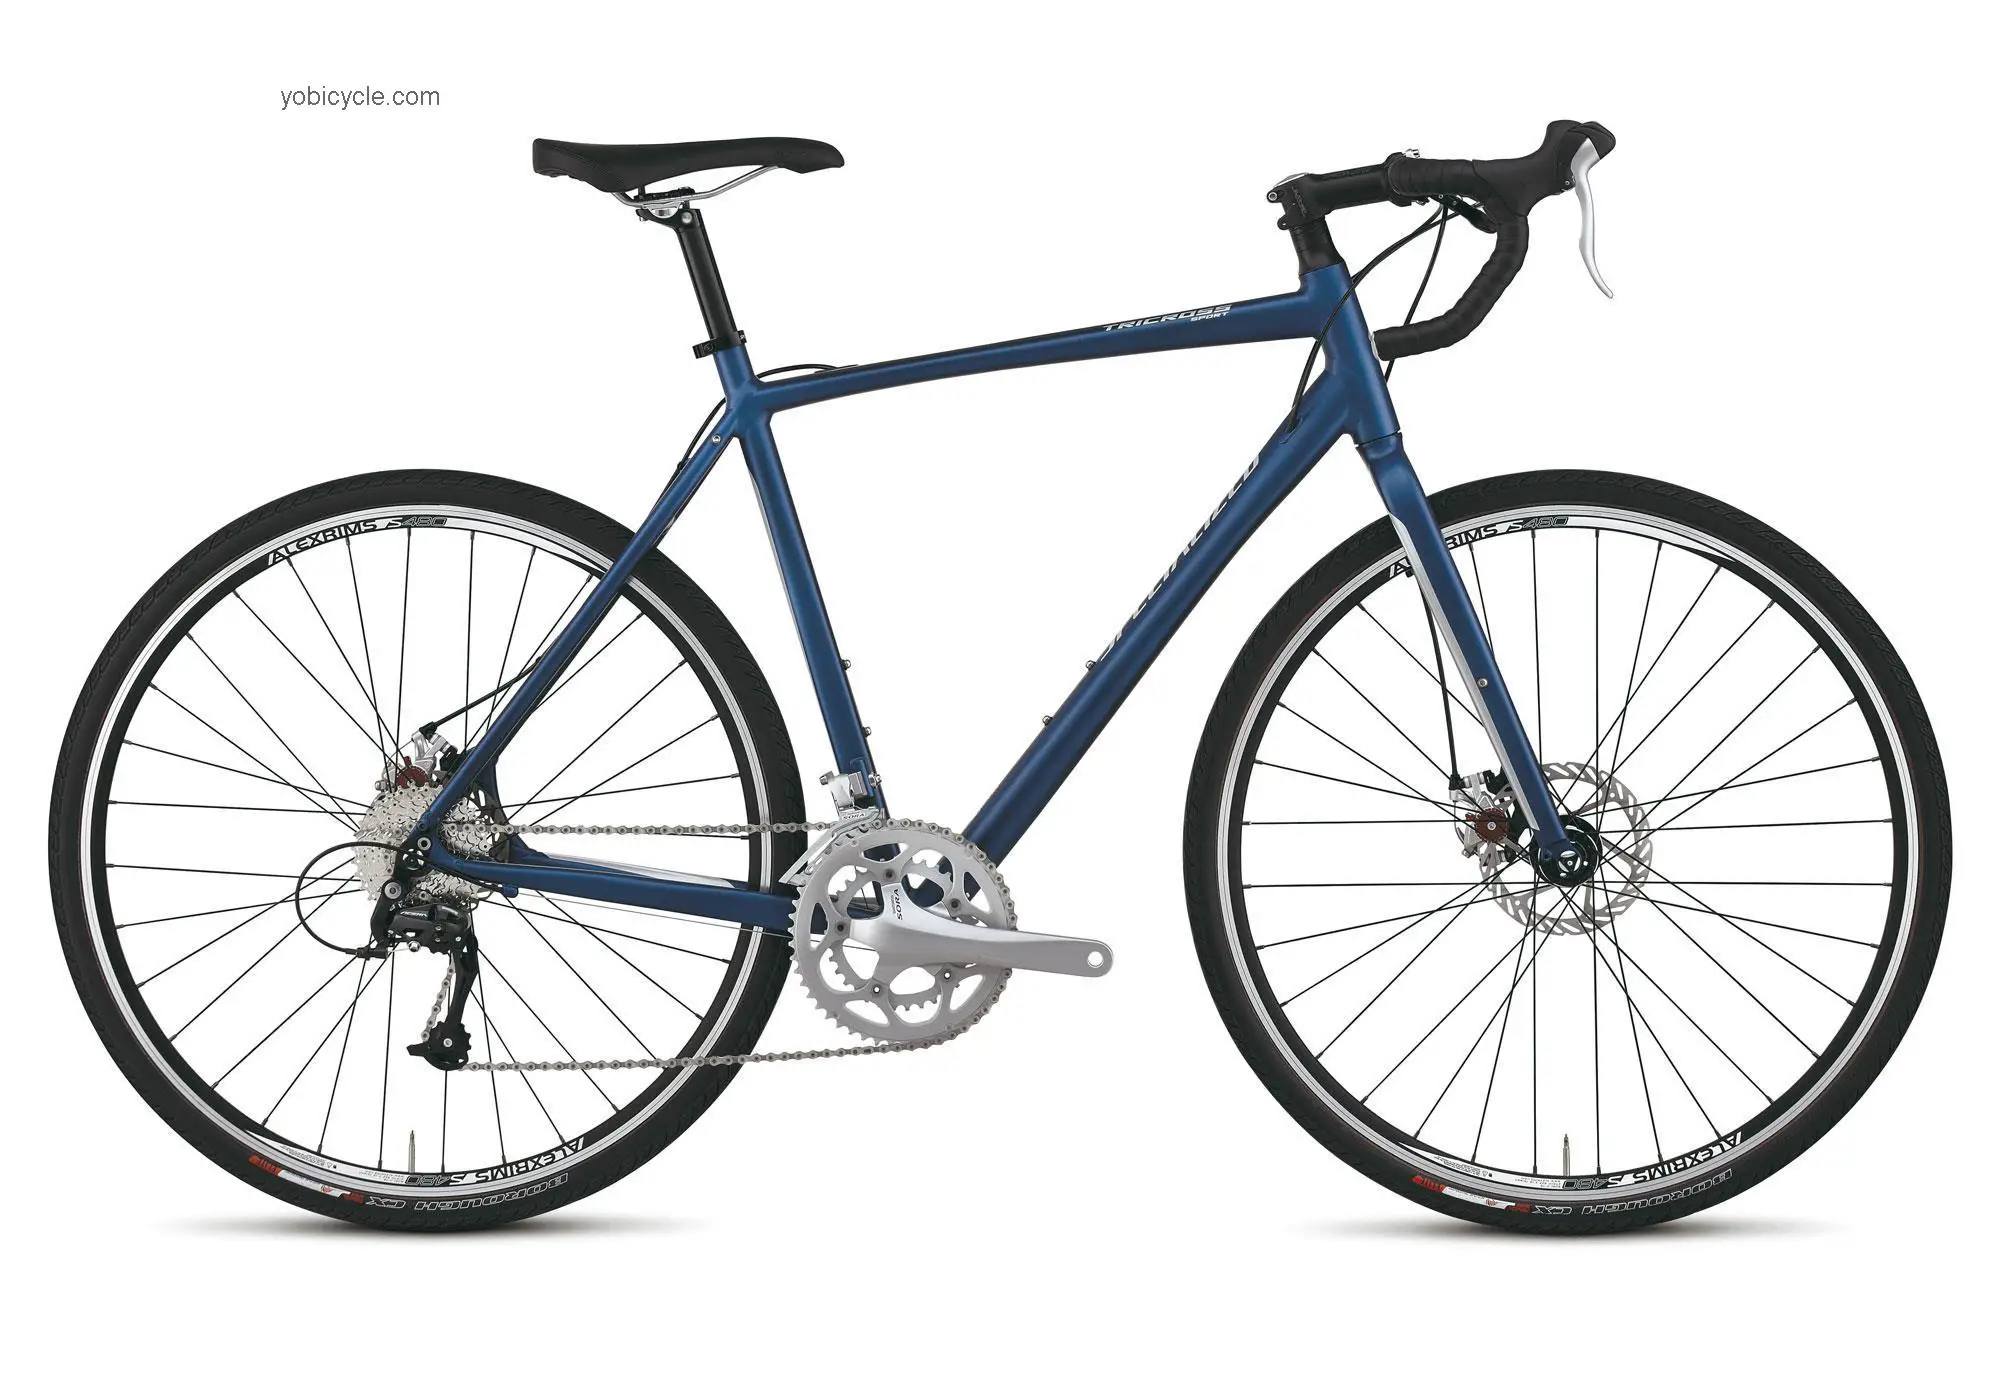 Specialized Tricross Sport Disc 2012 comparison online with competitors